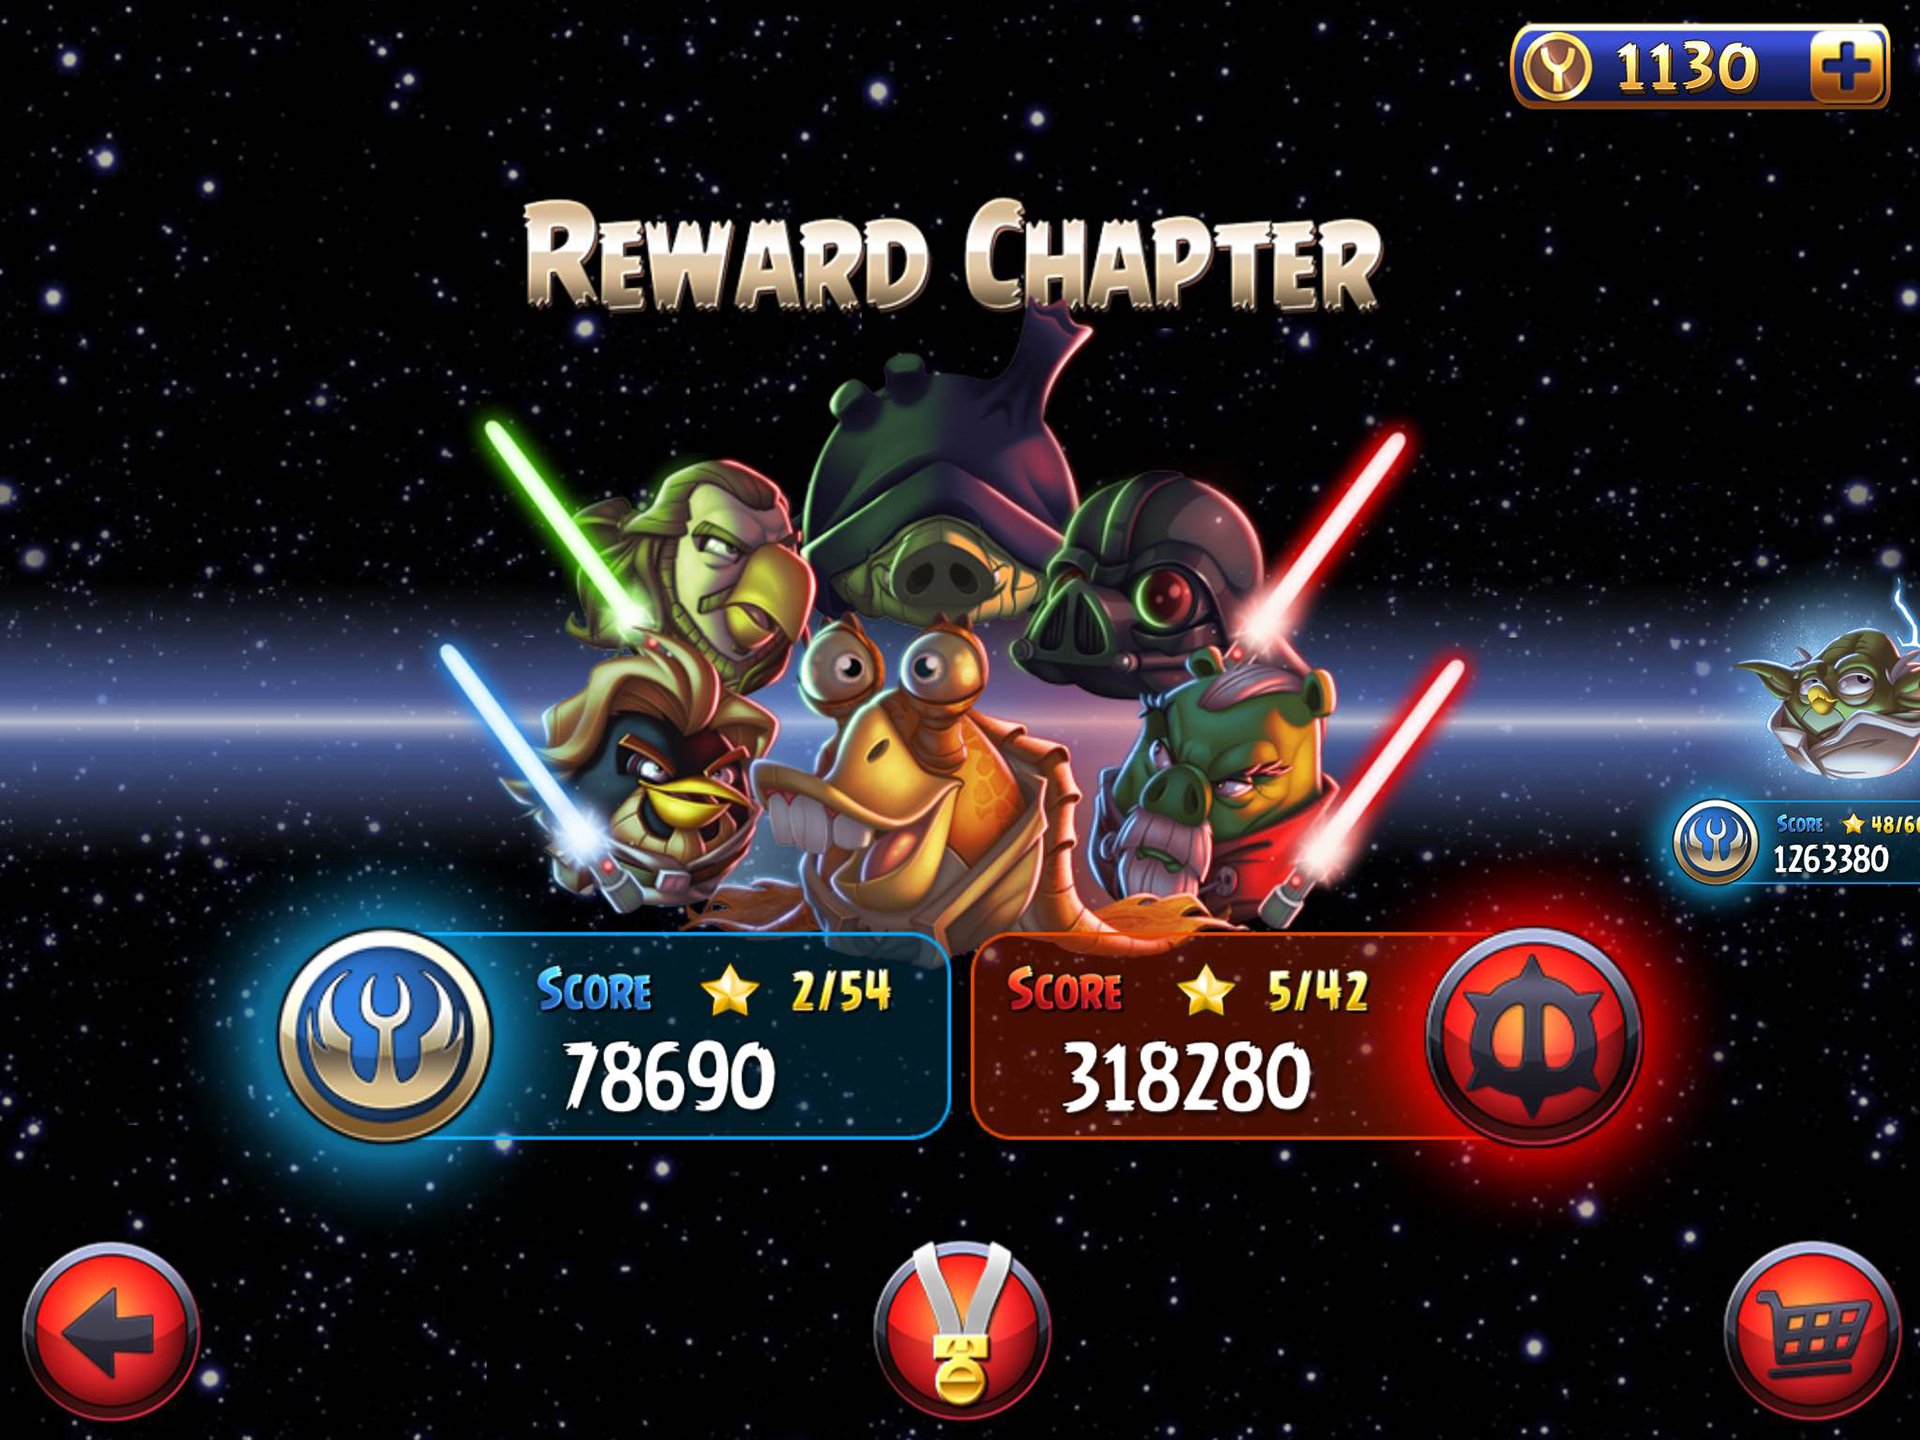 App Review: Angry Birds Star Wars II Could Have Been A Great Shameless Cash-Grab